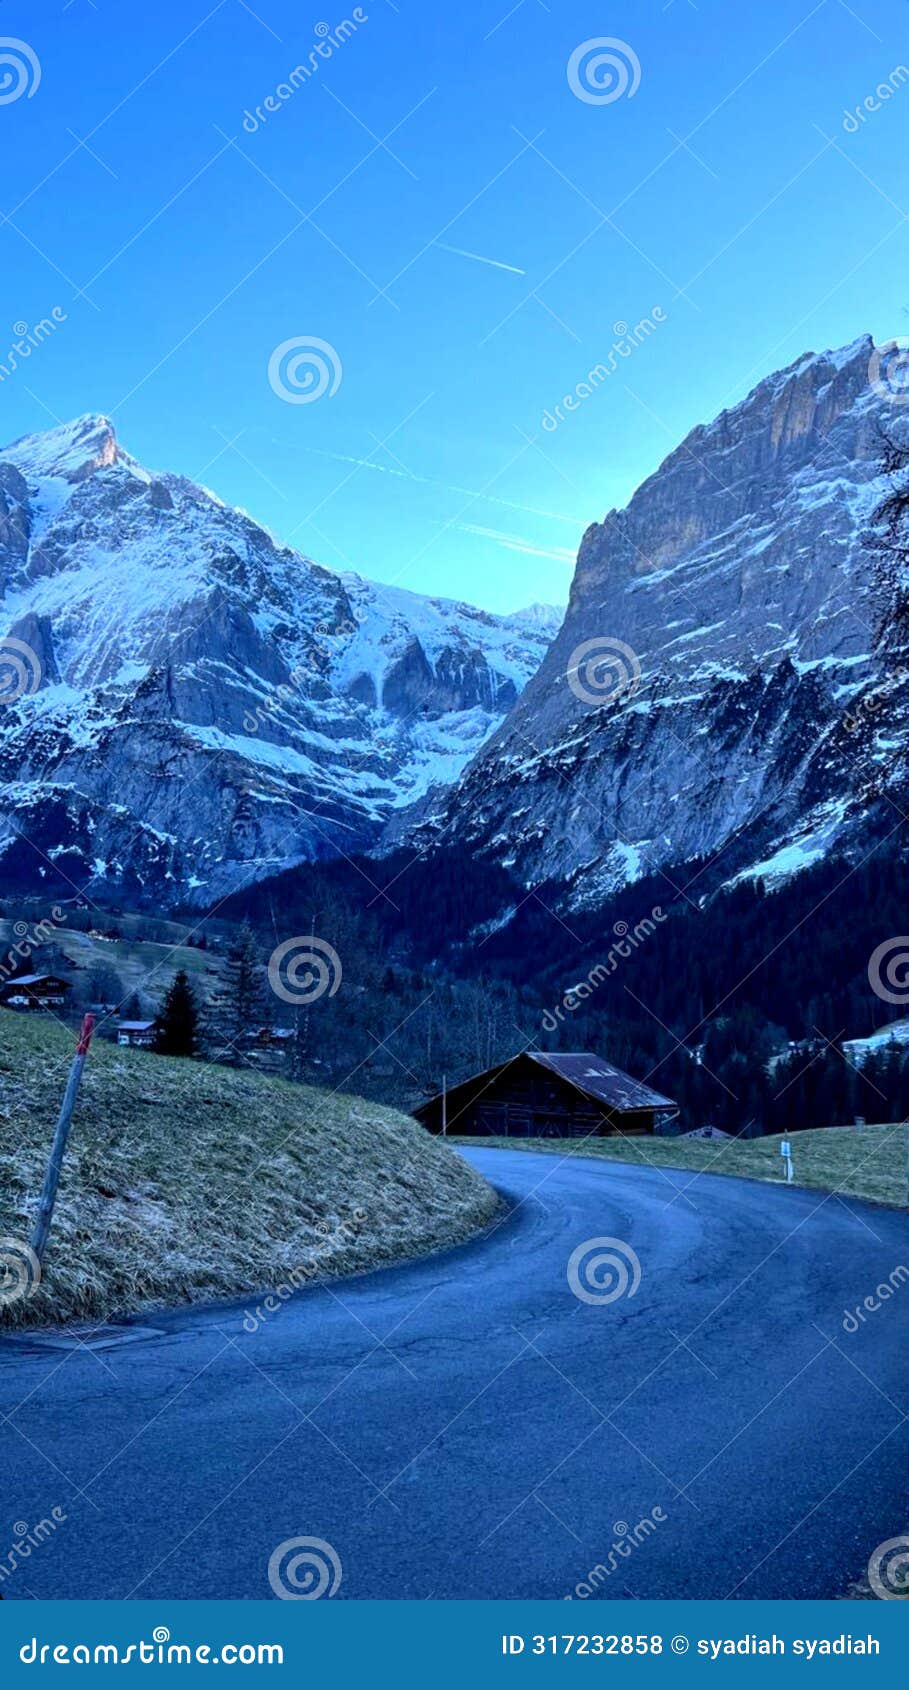 the road is flanked by two beautiful snowy mountains